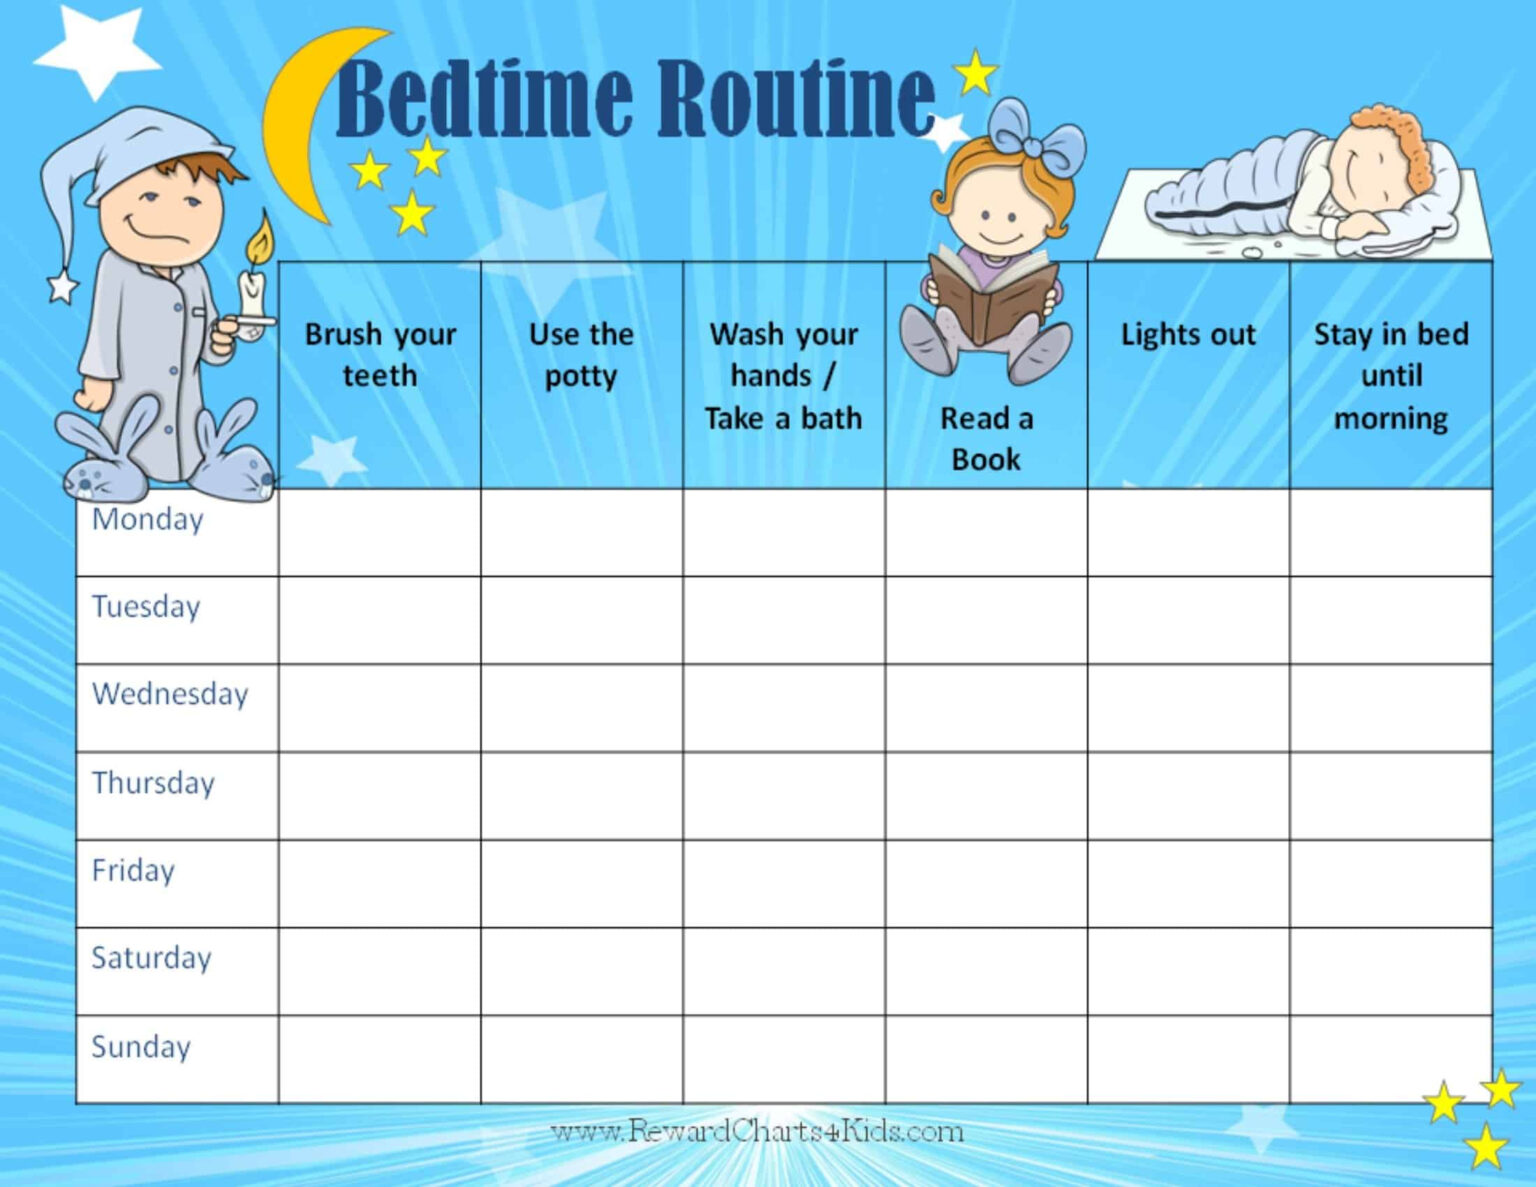 What Is A Bedtime Routine